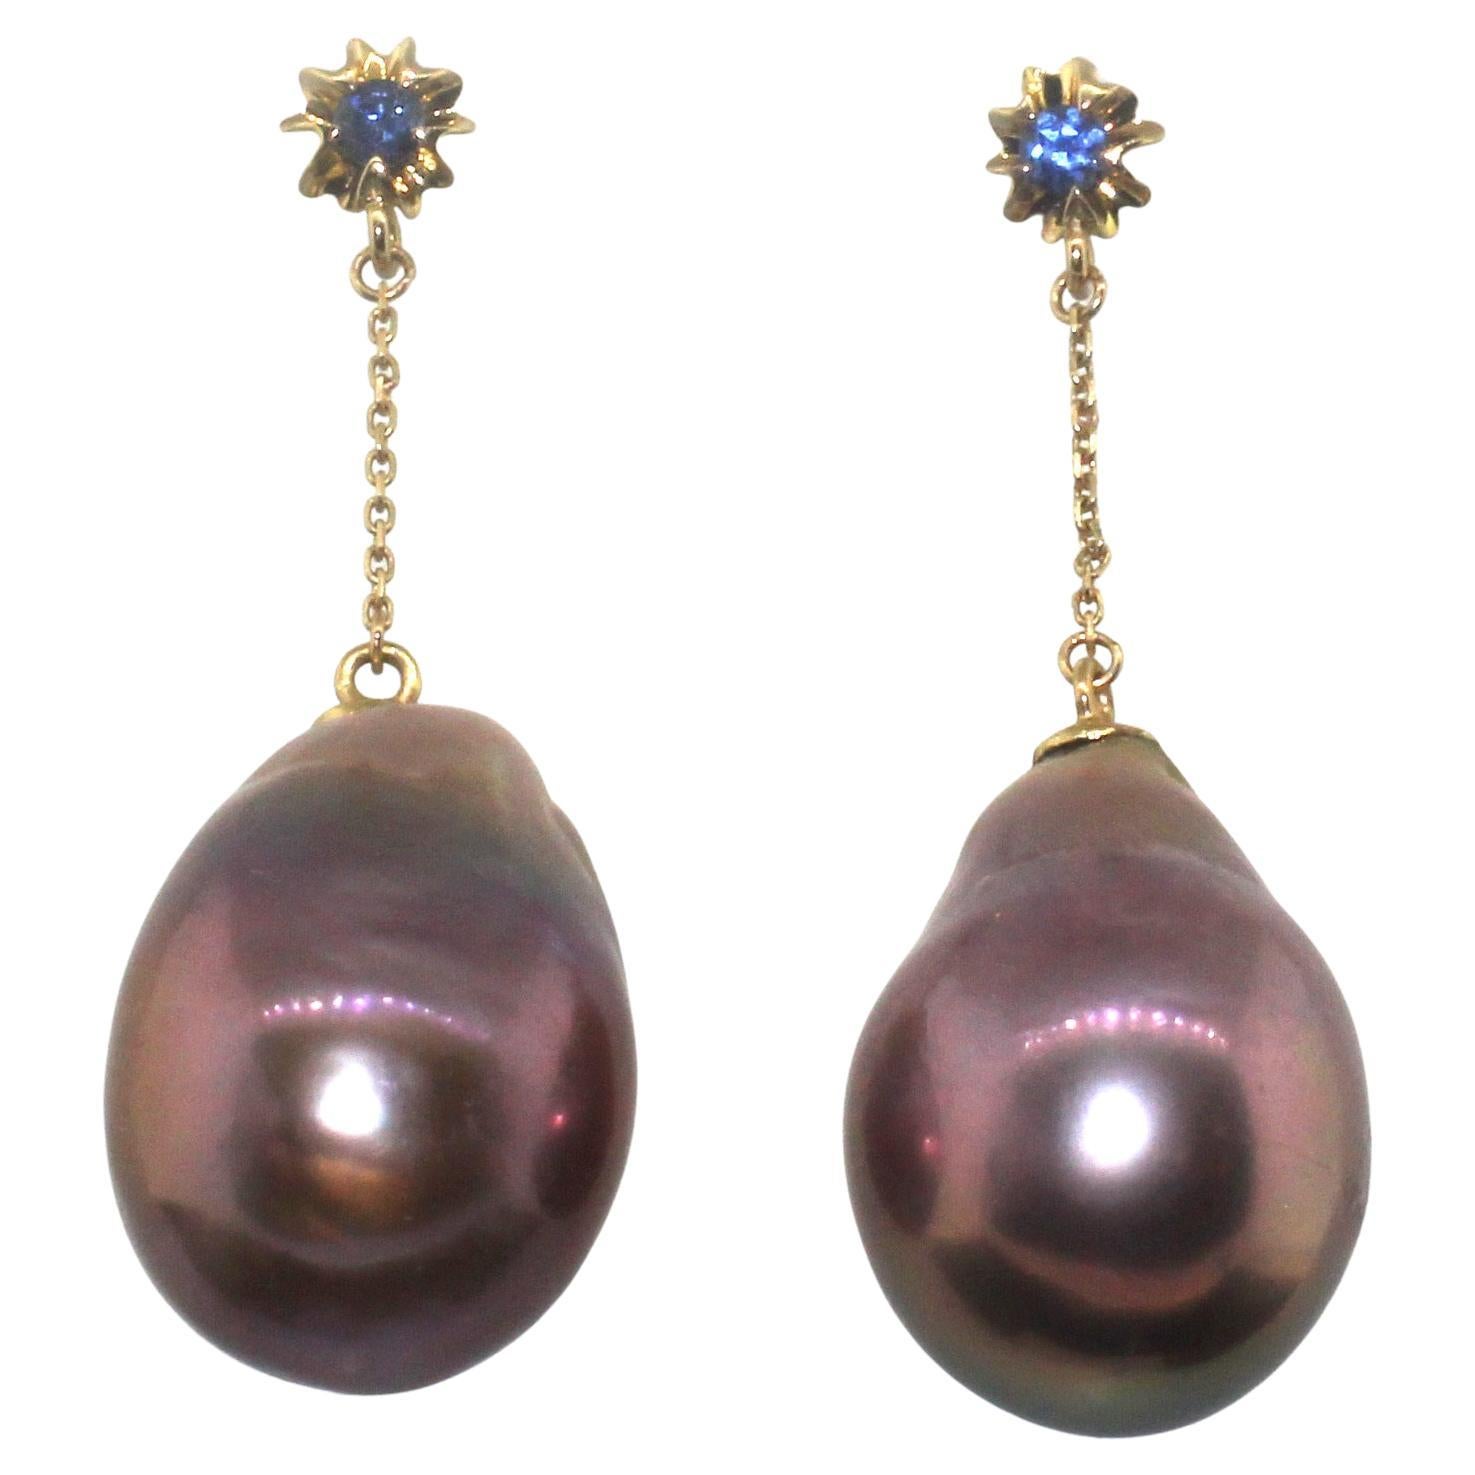 Hakimoto By Jewel Of Ocean
18K Yellow Gold Sapphire
Total item weight 9 grams
13x17 mm Cultured Baroque Cultured Pearls
18K Yellow Gold High Polish
Orient: Good
Luster: Very Good
Manufacture Suggested Retail Price $2,000